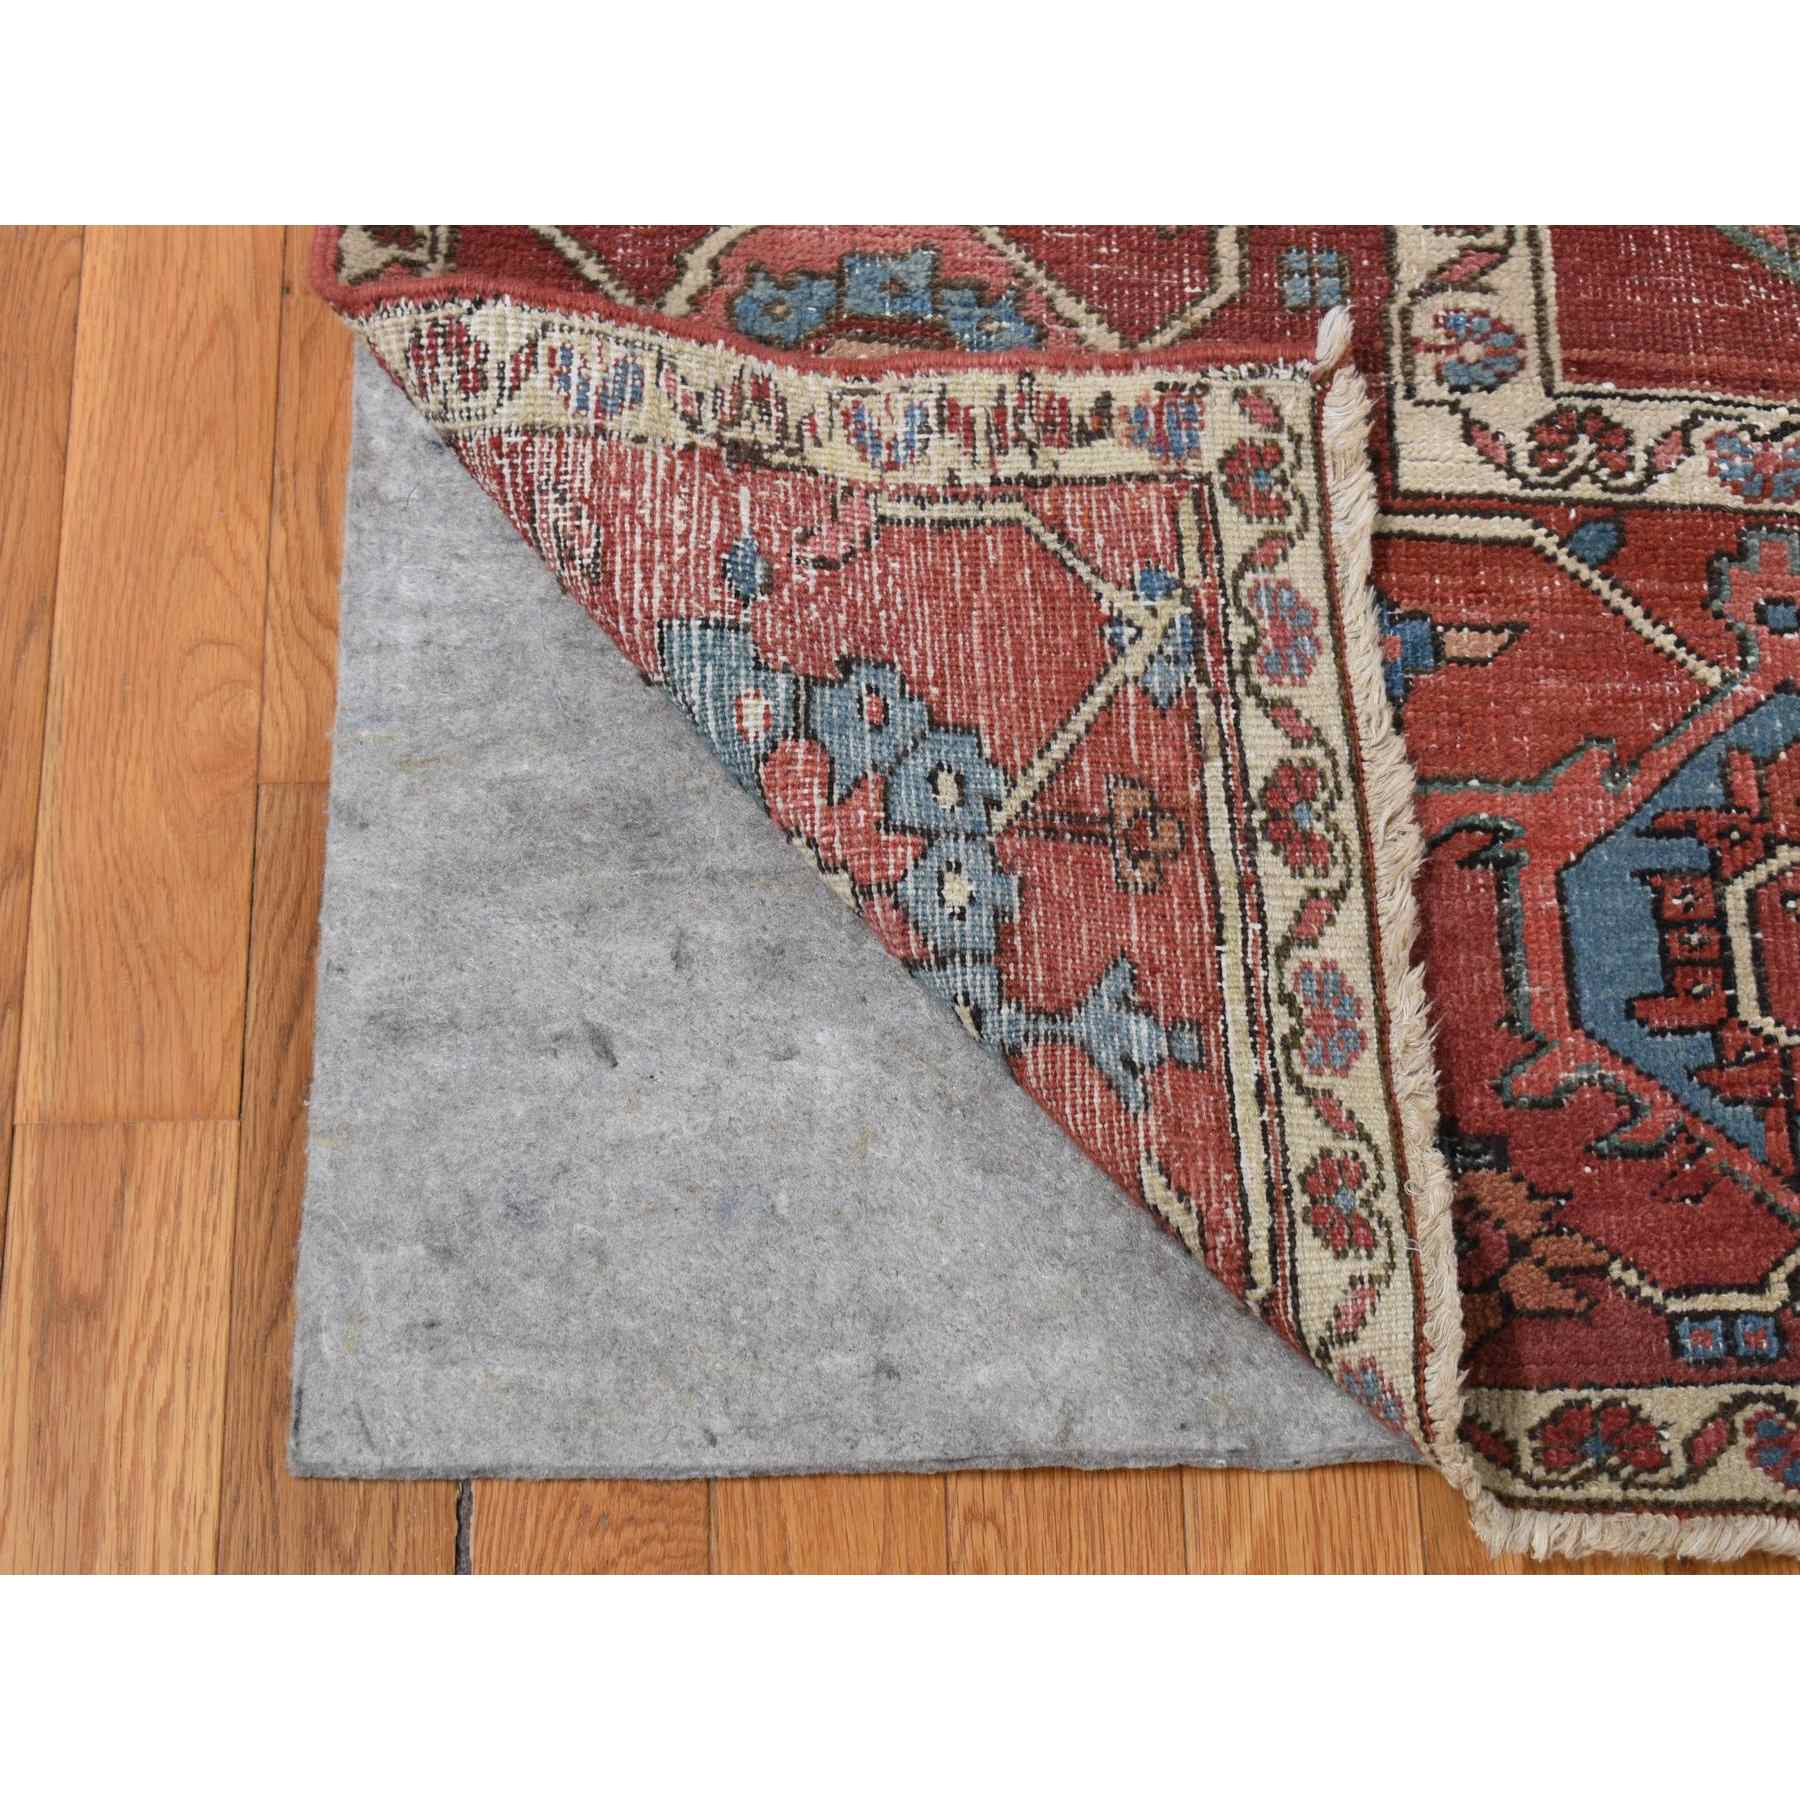 Antique-Hand-Knotted-Rug-403490